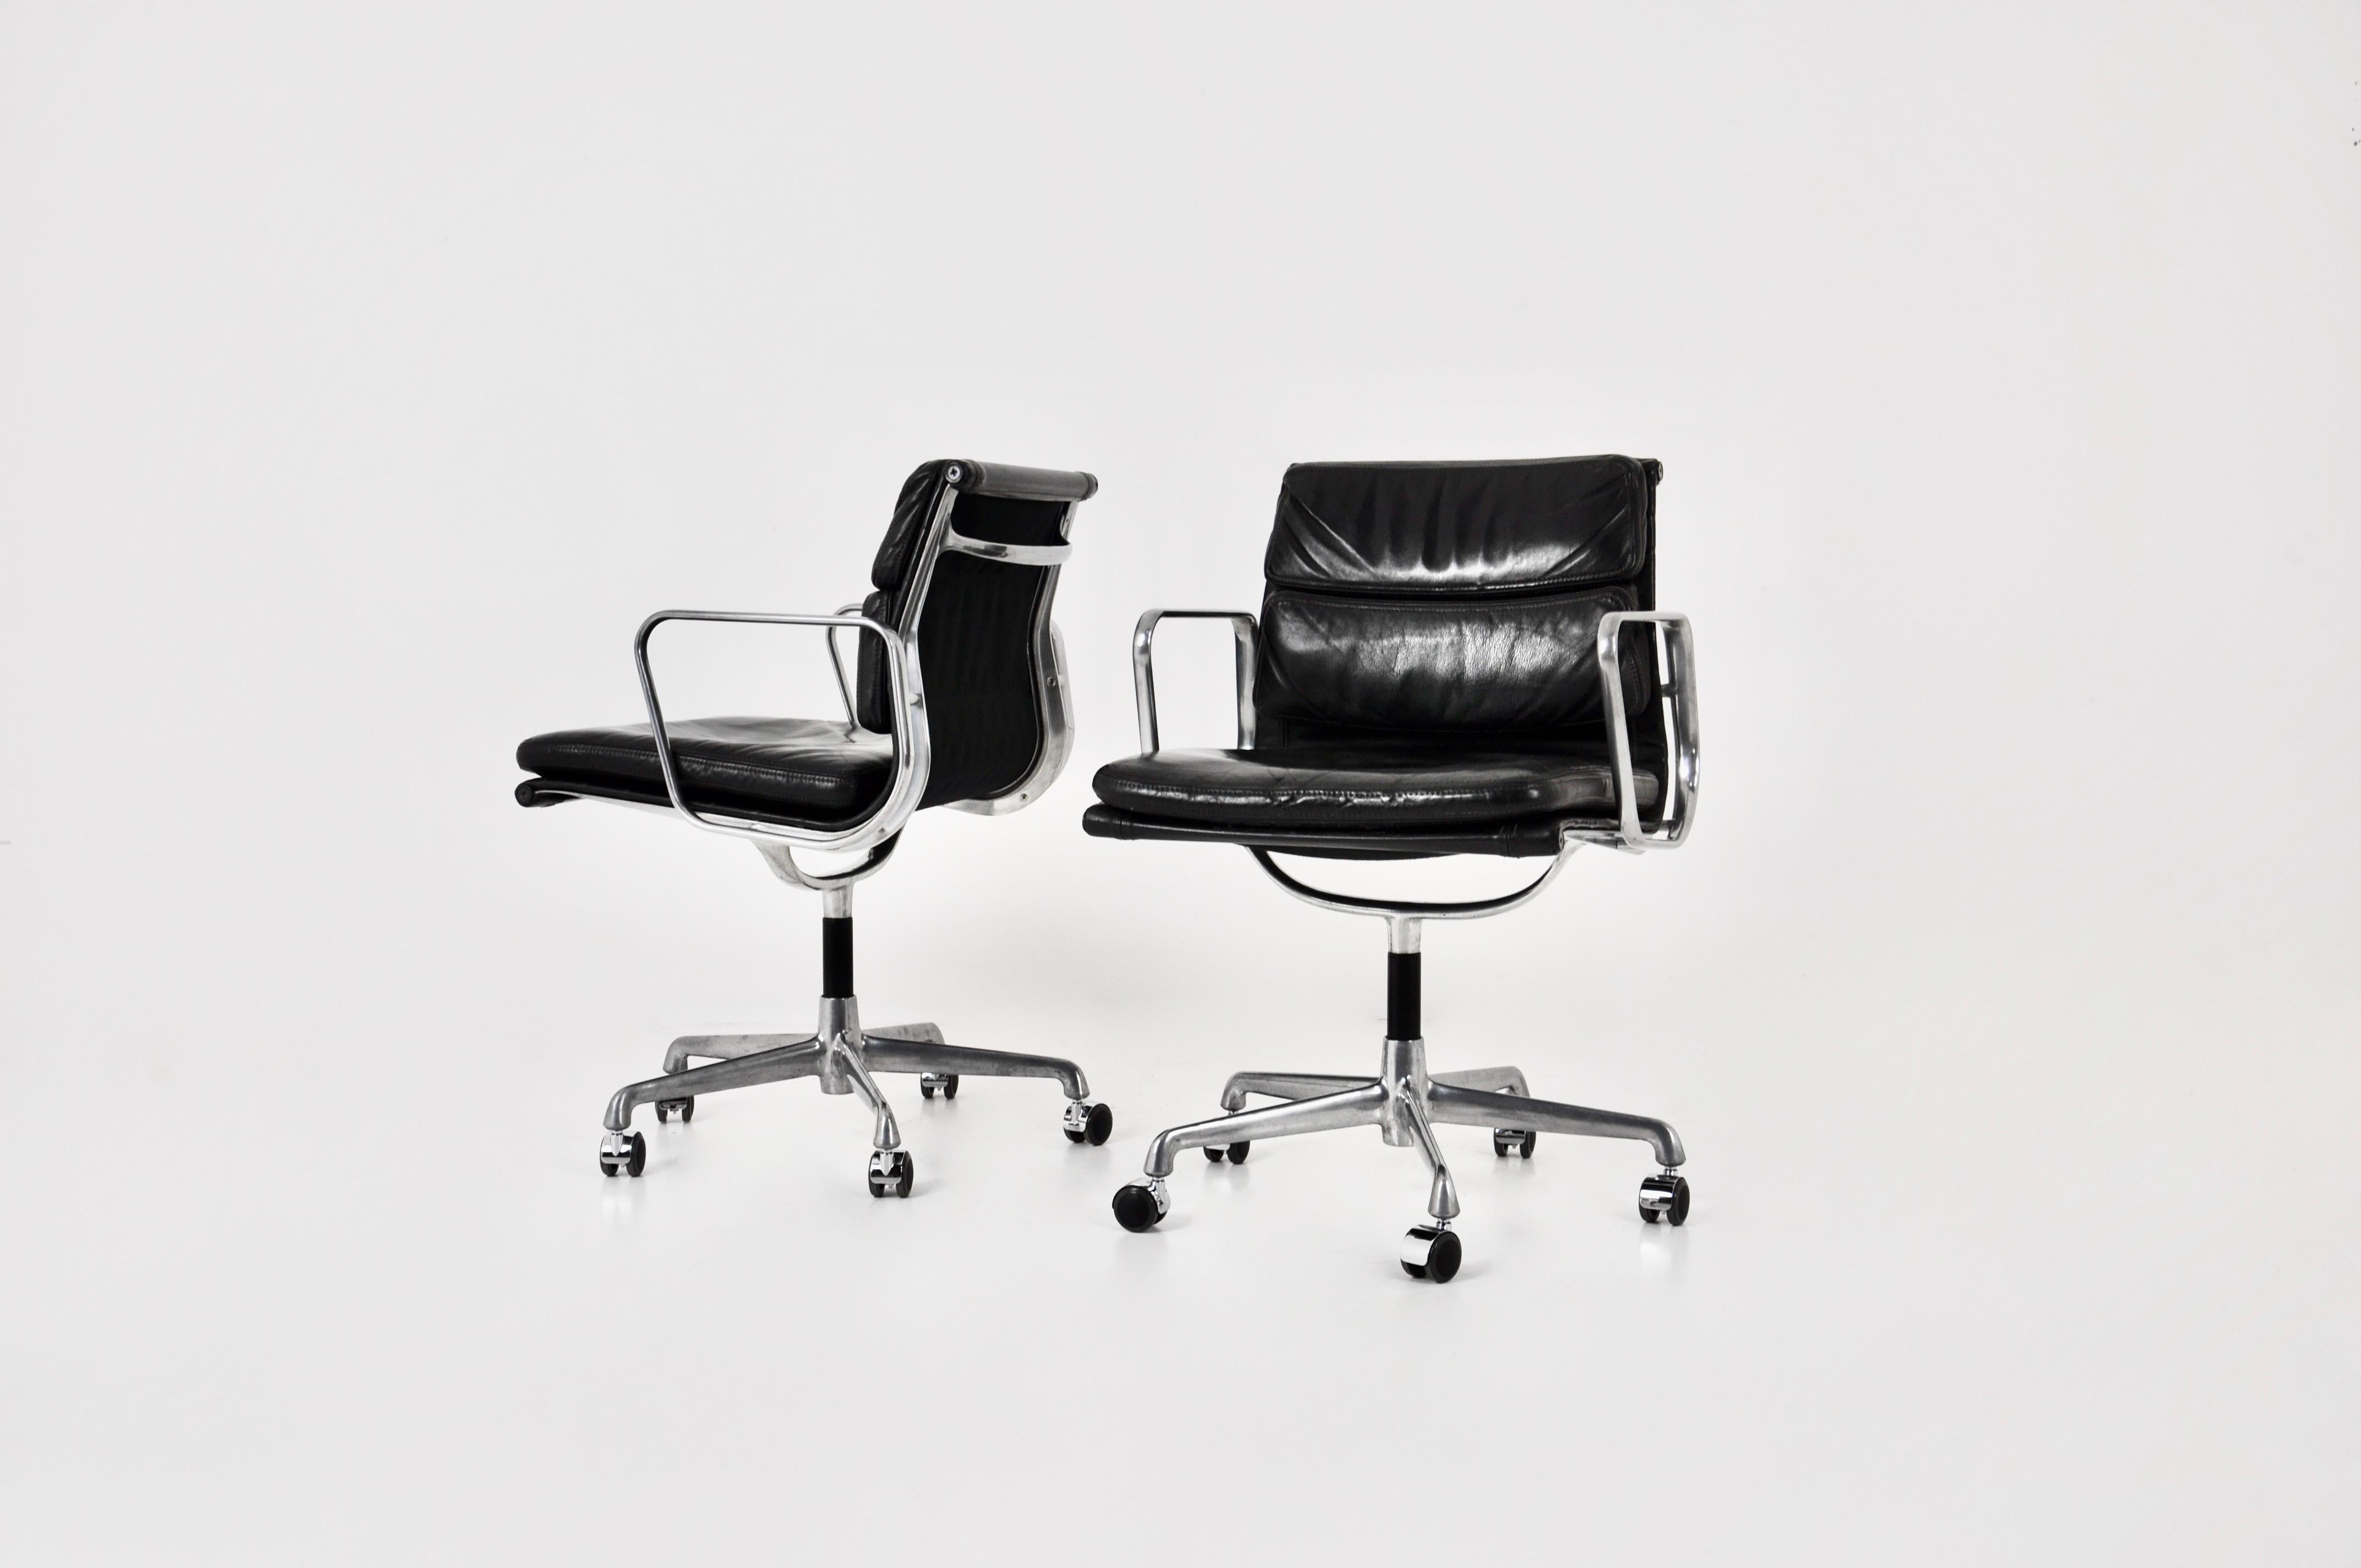 Black leather chairs with aluminium base and wheels. Dimensions: Seat height 50cm. Wear due to time and age of the chair.
 